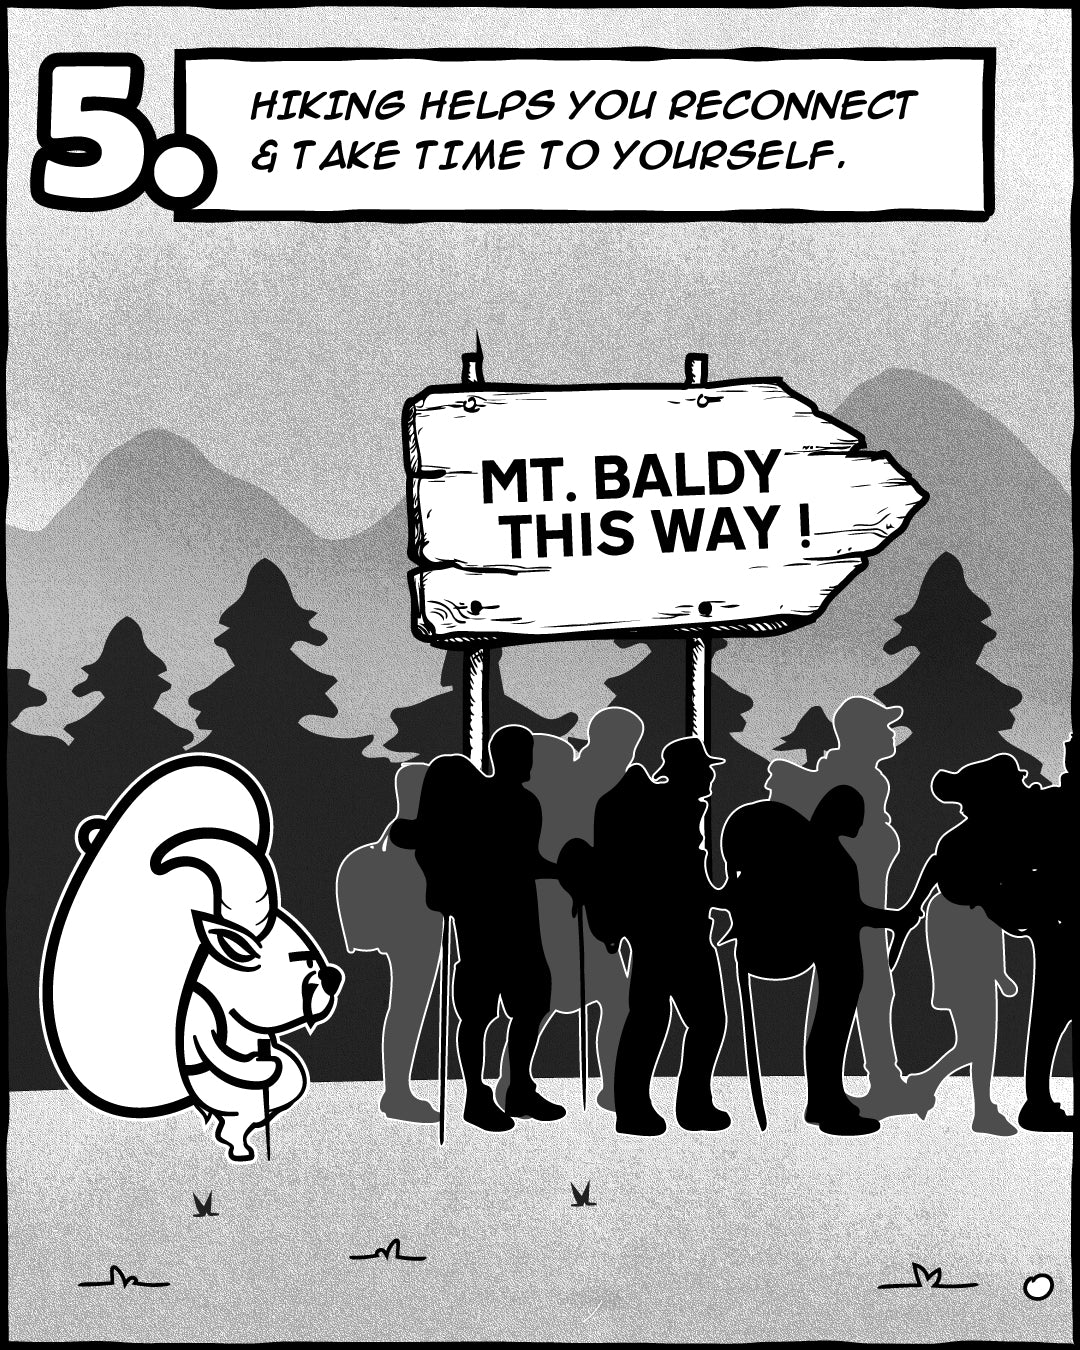 Helps You Reconnect To Yourself - 5 Reasons Hiking Is Good For Your Soul, The Adventures Of Lambert Comic Series | TRVRS Outdoors